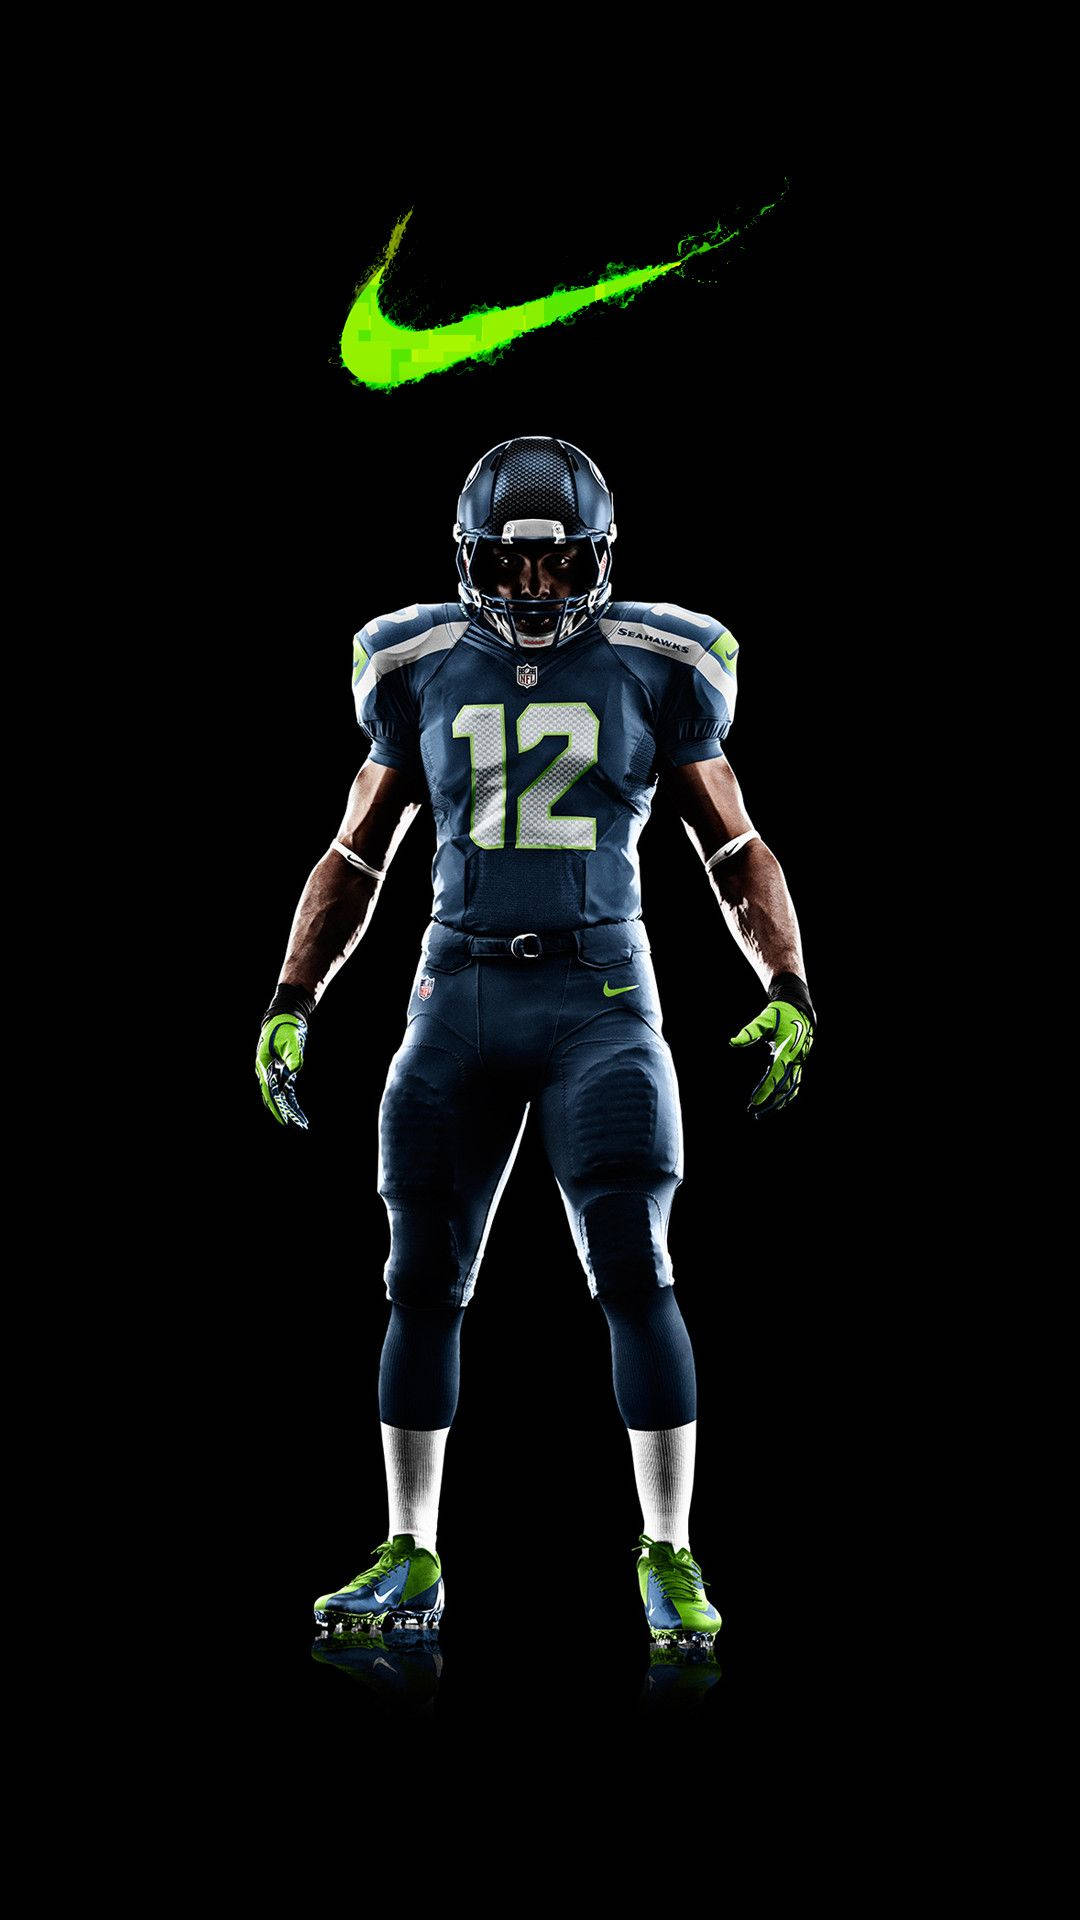 Unyielding determination: Seattle Seahawks Player in Action Wallpaper